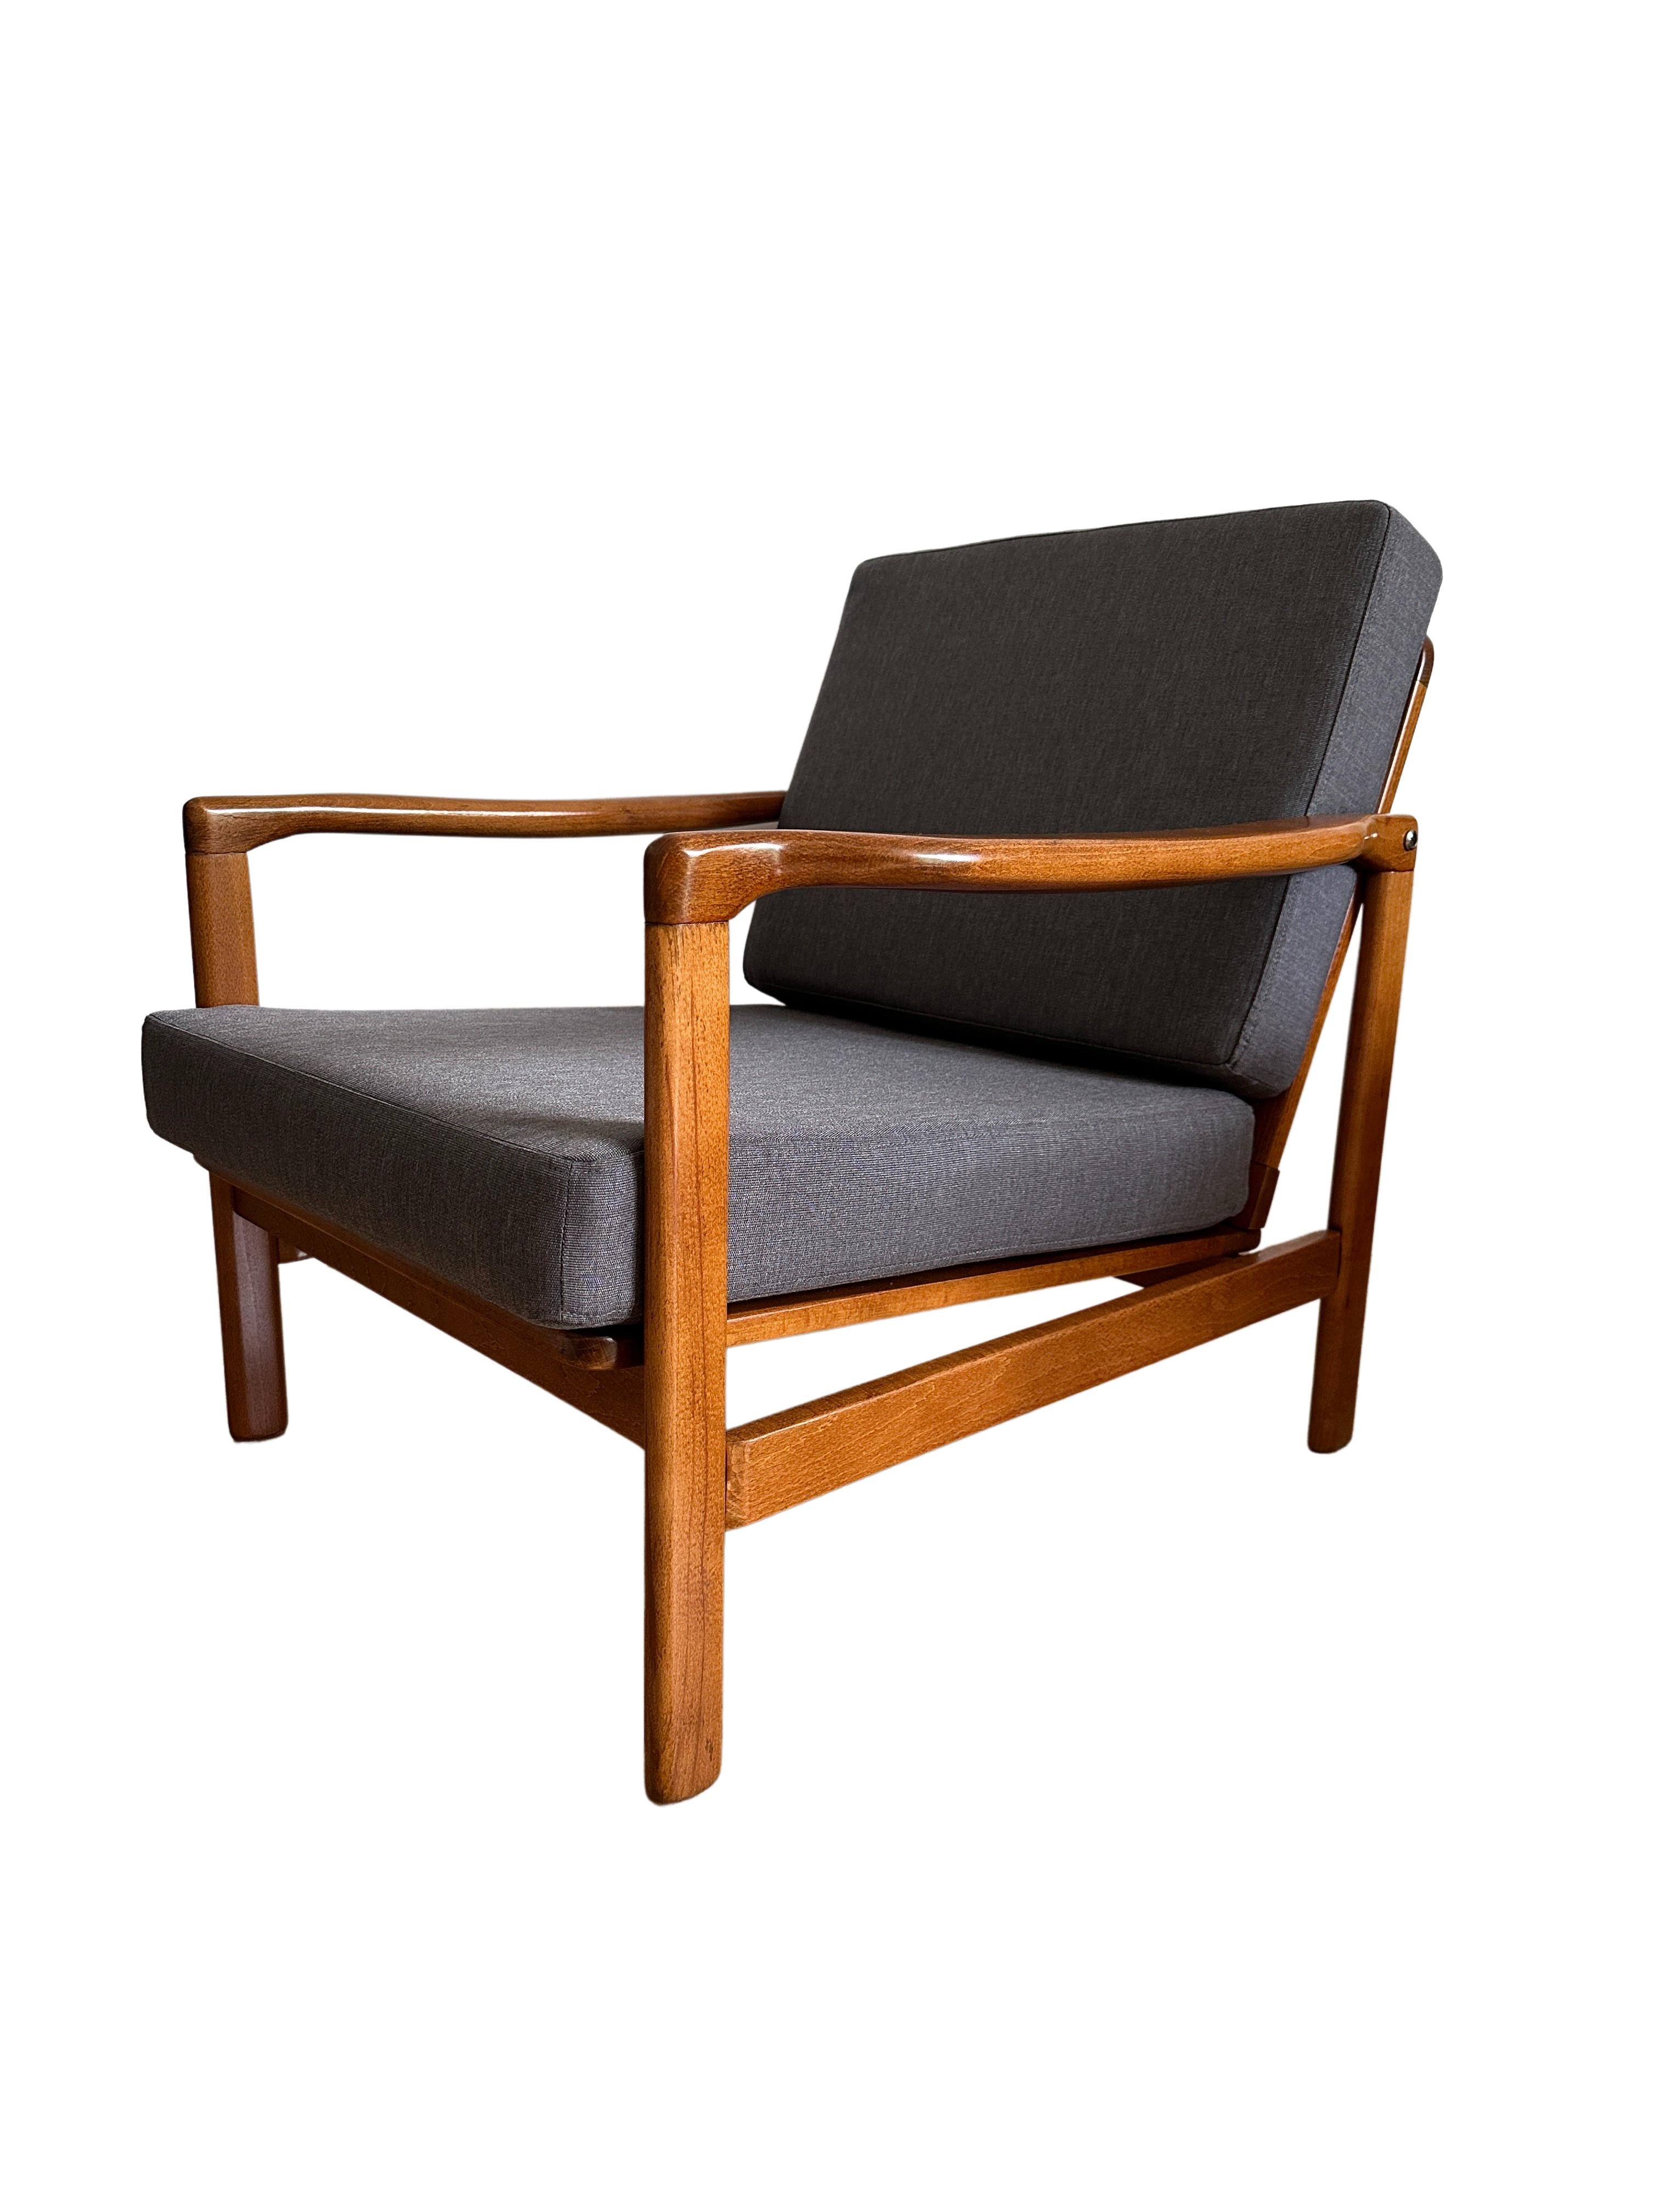 Mid century lounge chair model B-7752, designed by Zenon Baczyk, has been manufactured by Swarzedzkie Fabryki Mebli in Poland in the 1960s. 

The structure is made of beech wood in deep honey brown color, finished with a semi matte varnish. 

The